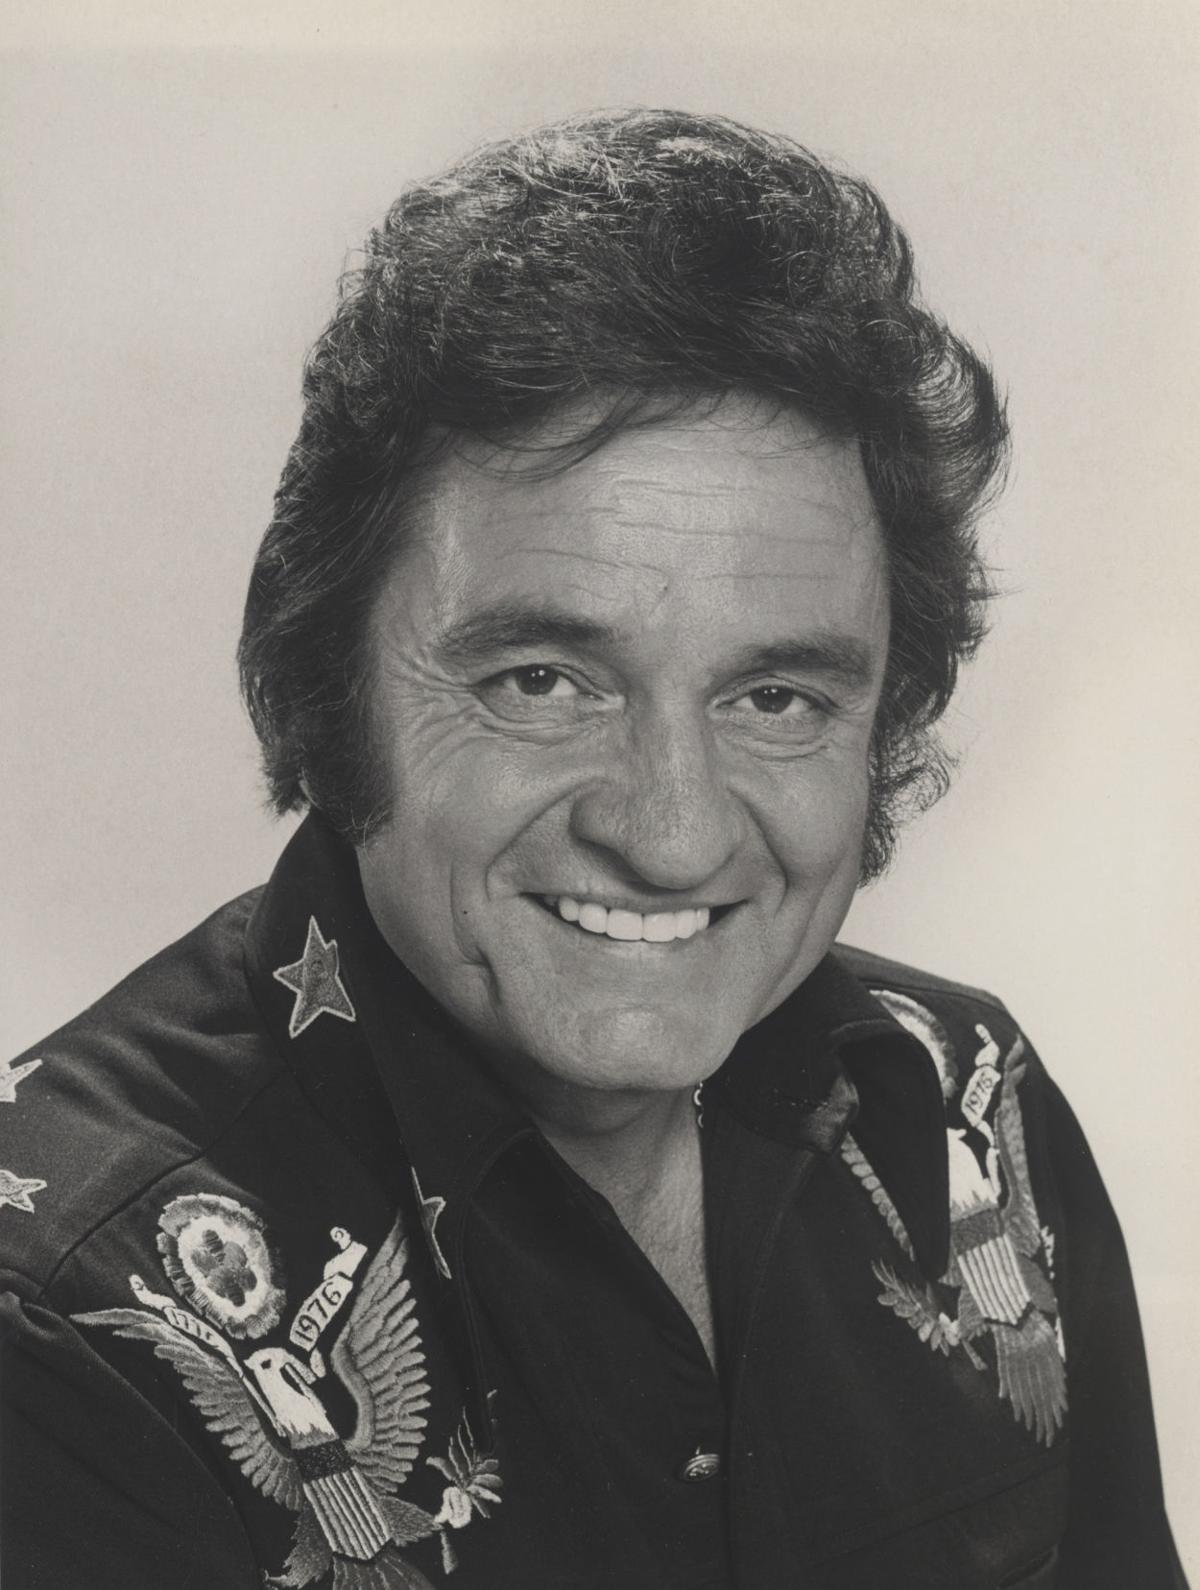 Throwback Thursday: Dubuquer makes Johnny Cash connection at 1979 ...